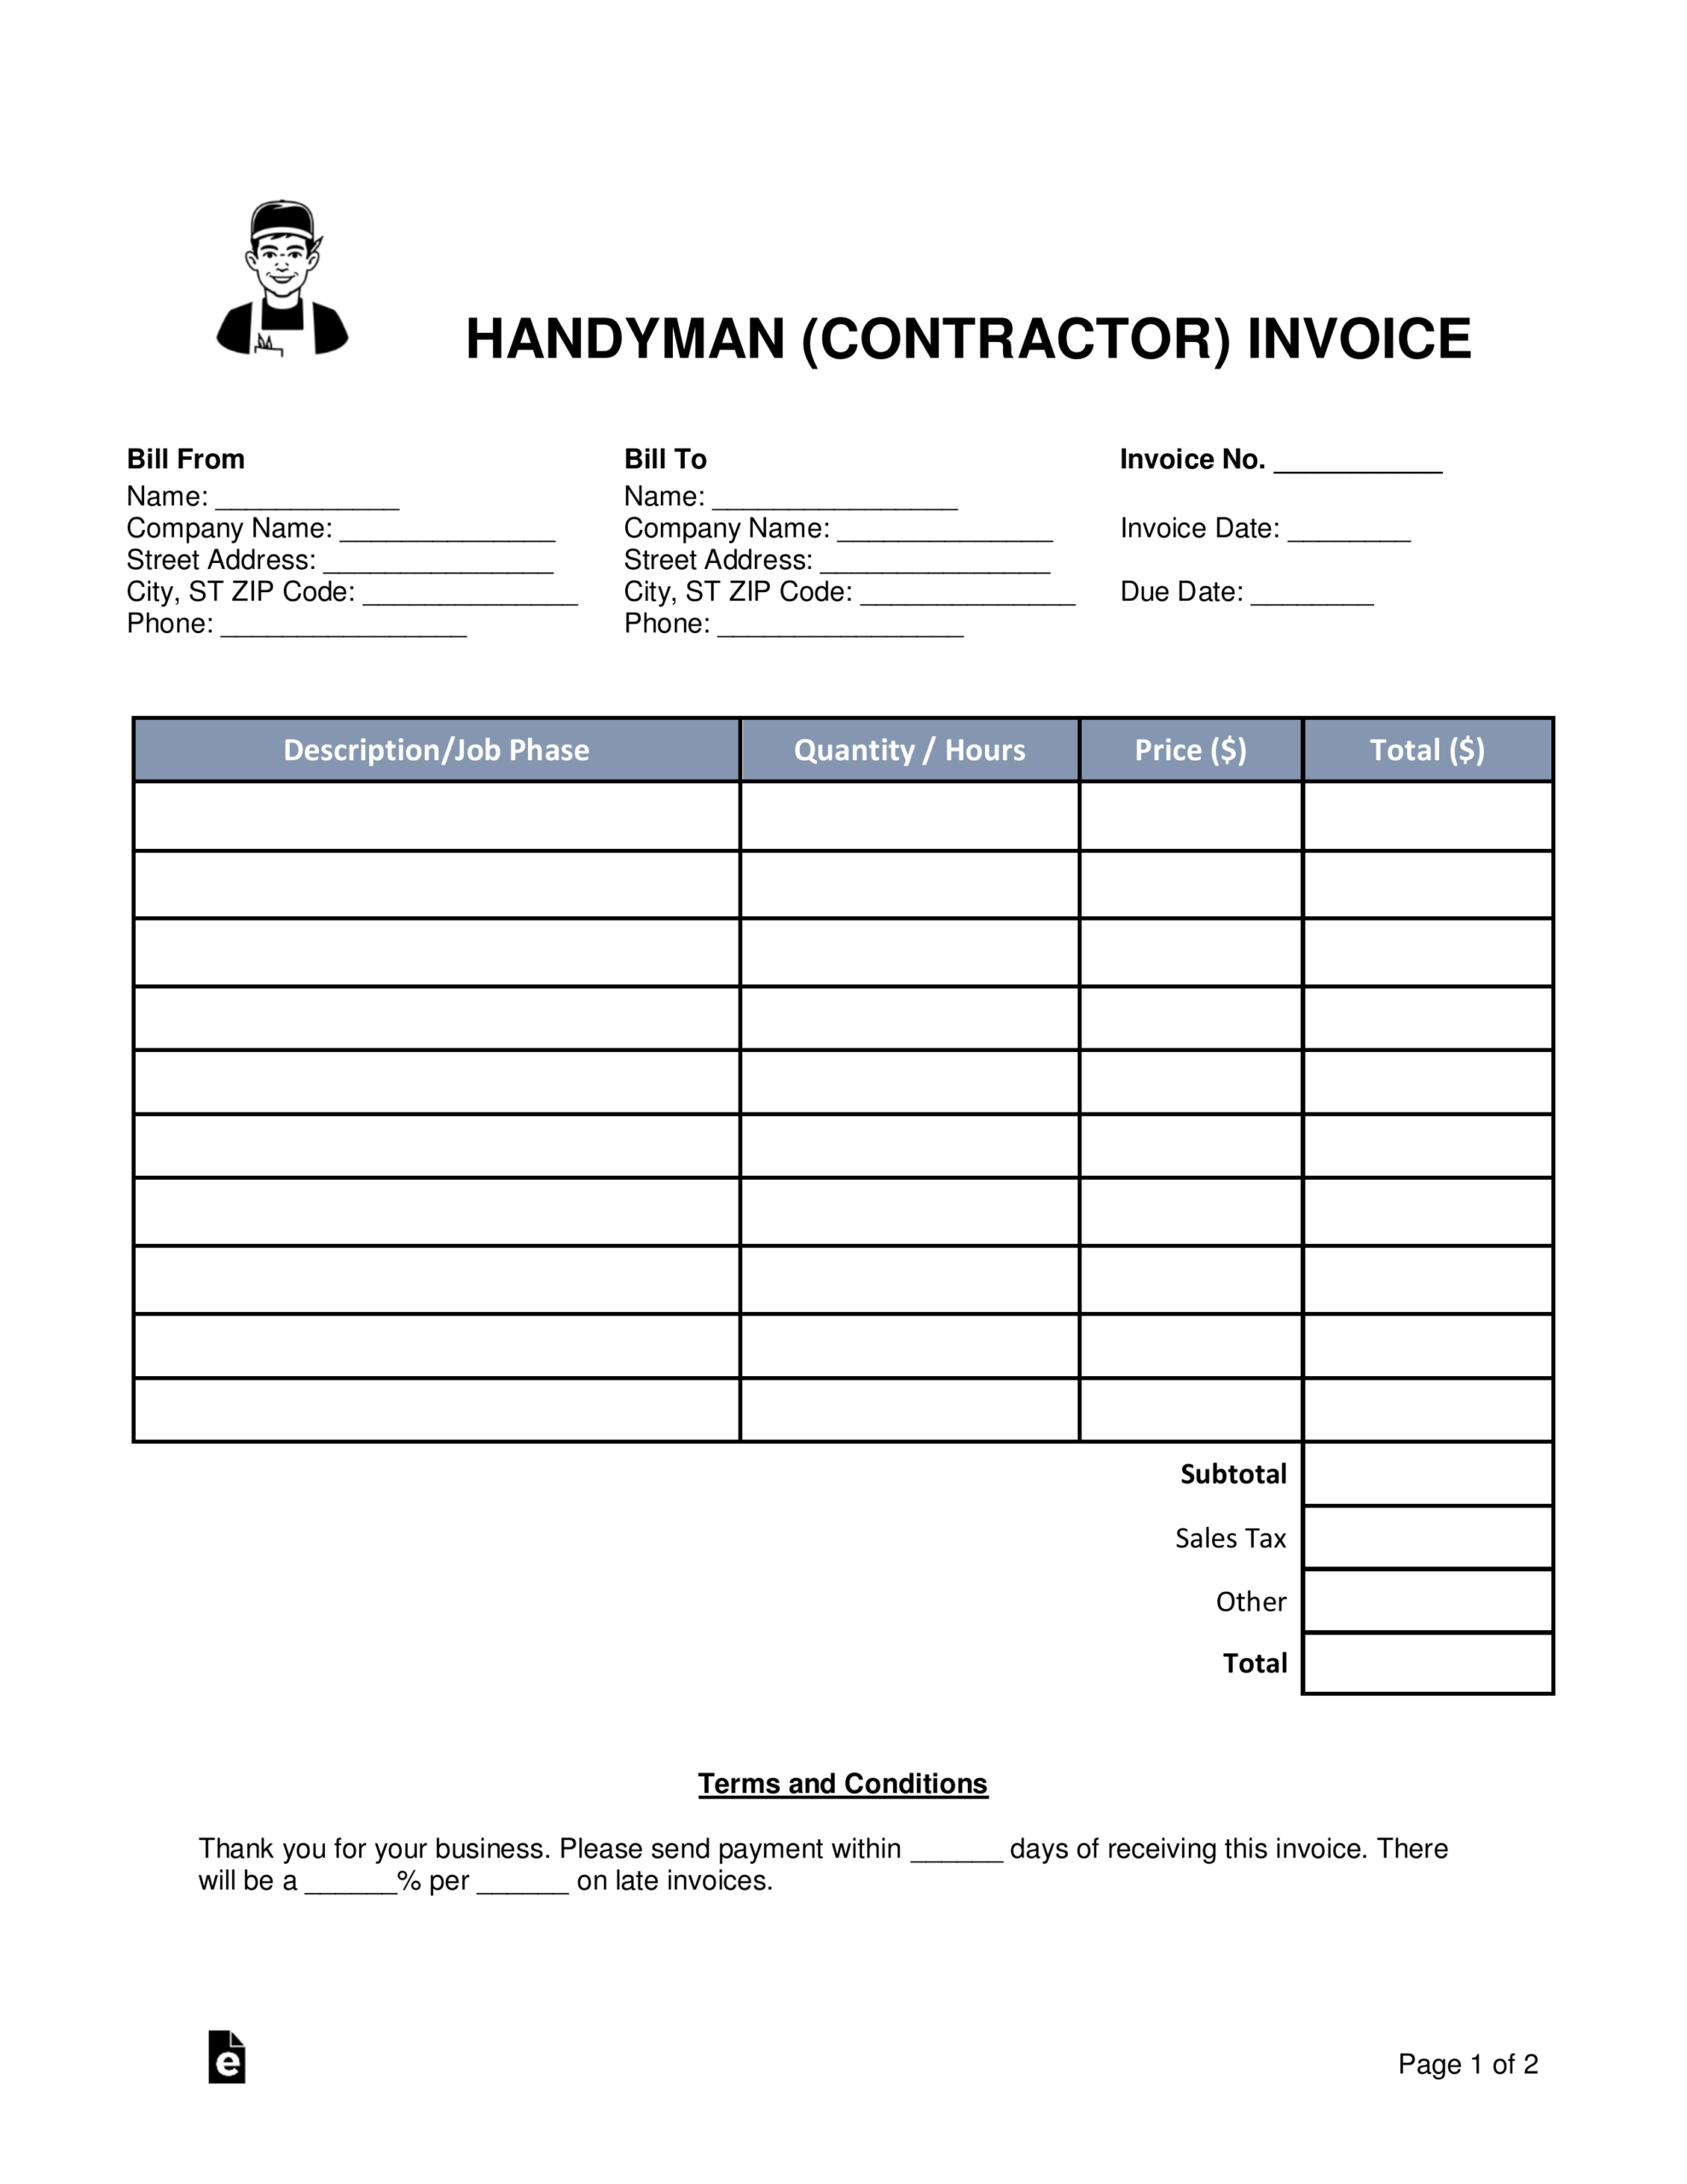 Free Handyman (Contractor) Invoice Template – Word | Pdf With General Contractor Invoice Template